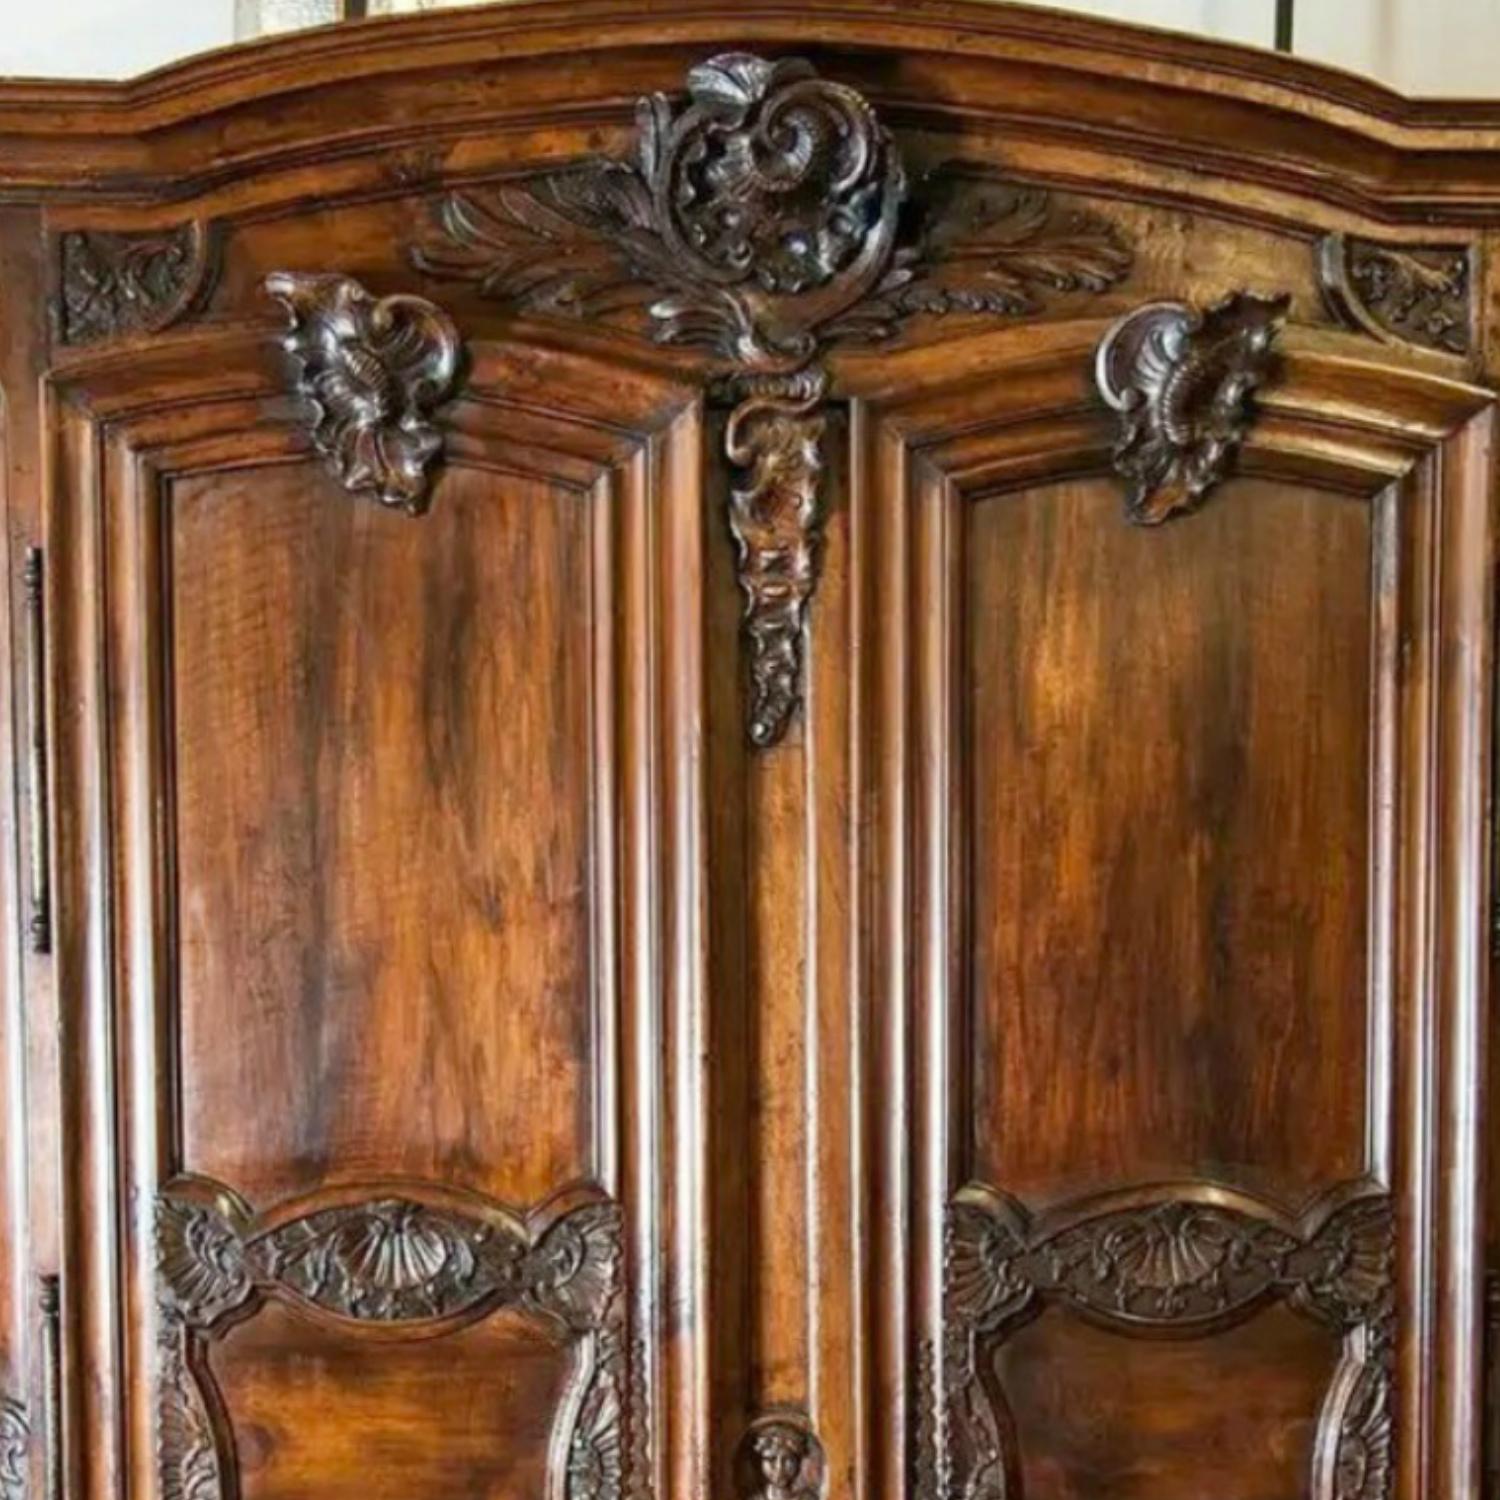 Exceptional 18th Century French Régence Period Walnut Chateau Lyonnaise Armoire In Excellent Condition For Sale In Birmingham, AL